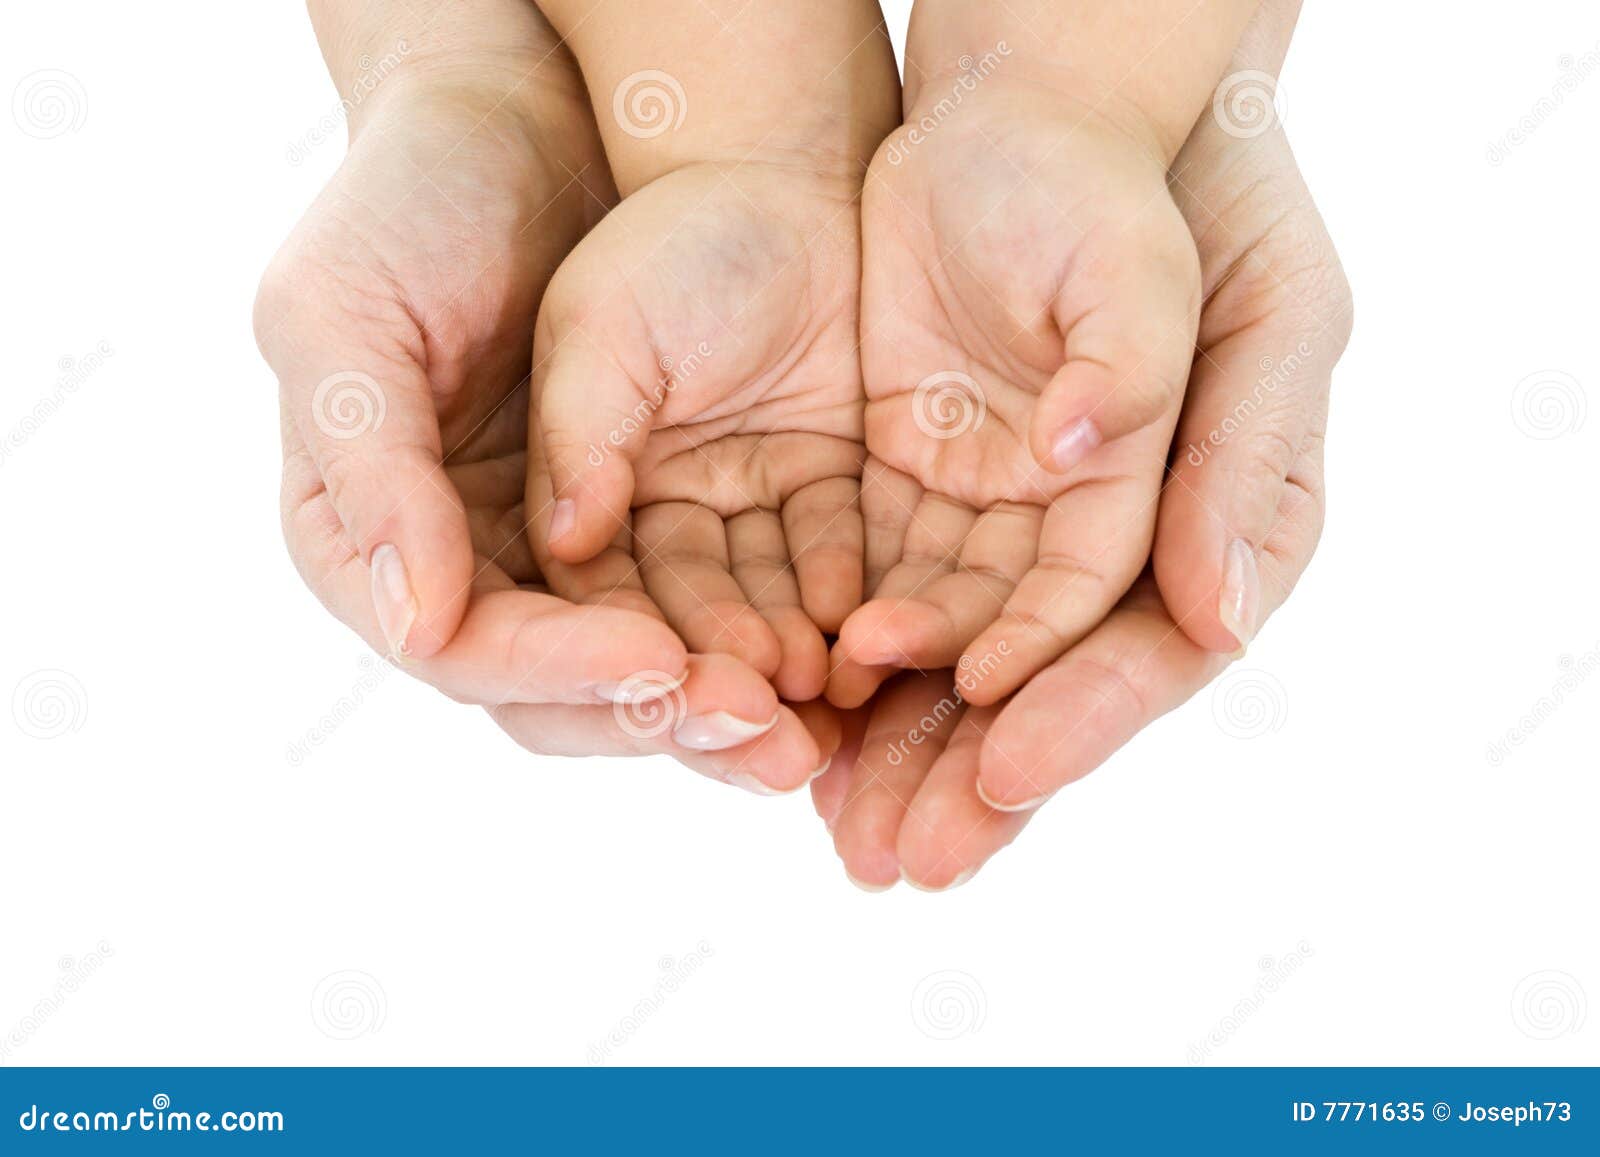 woman hand hold a child's handful